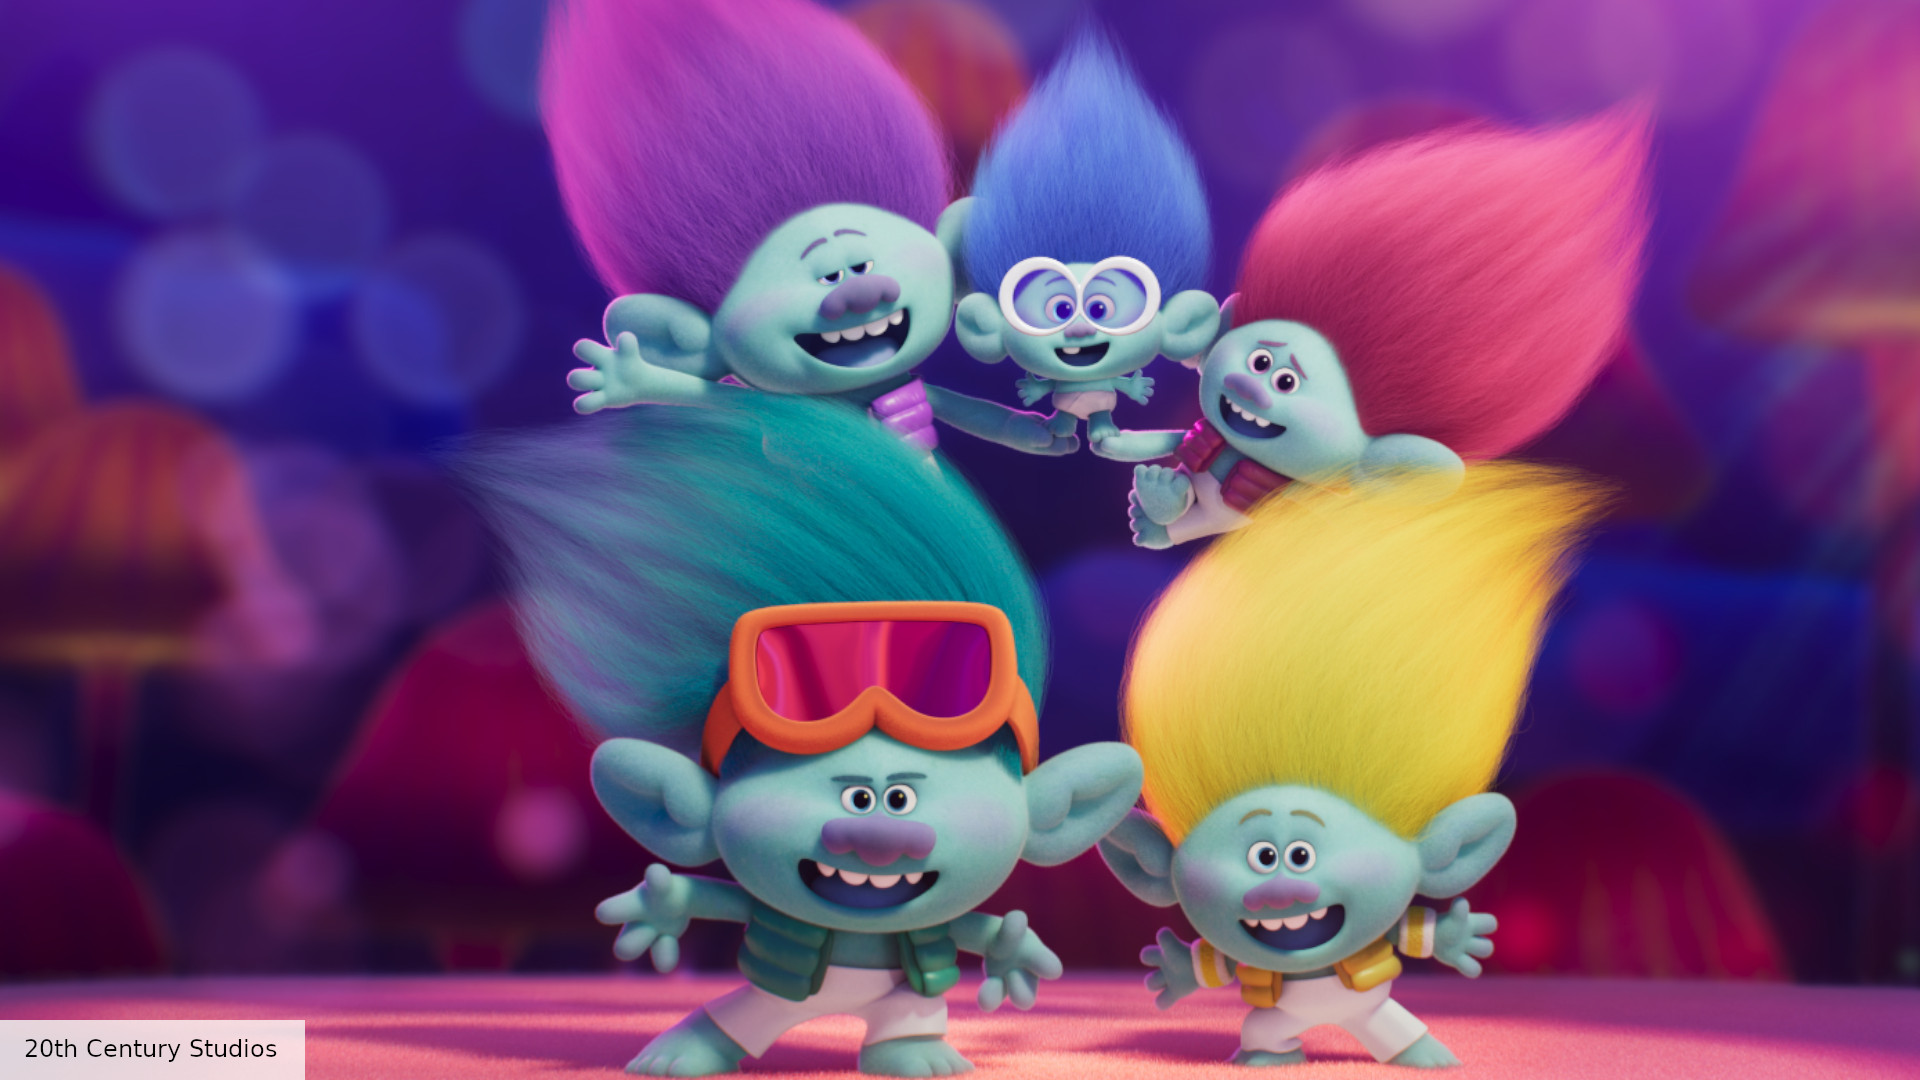 Trolls 3 trailer teases new characters, new title, and a wedding